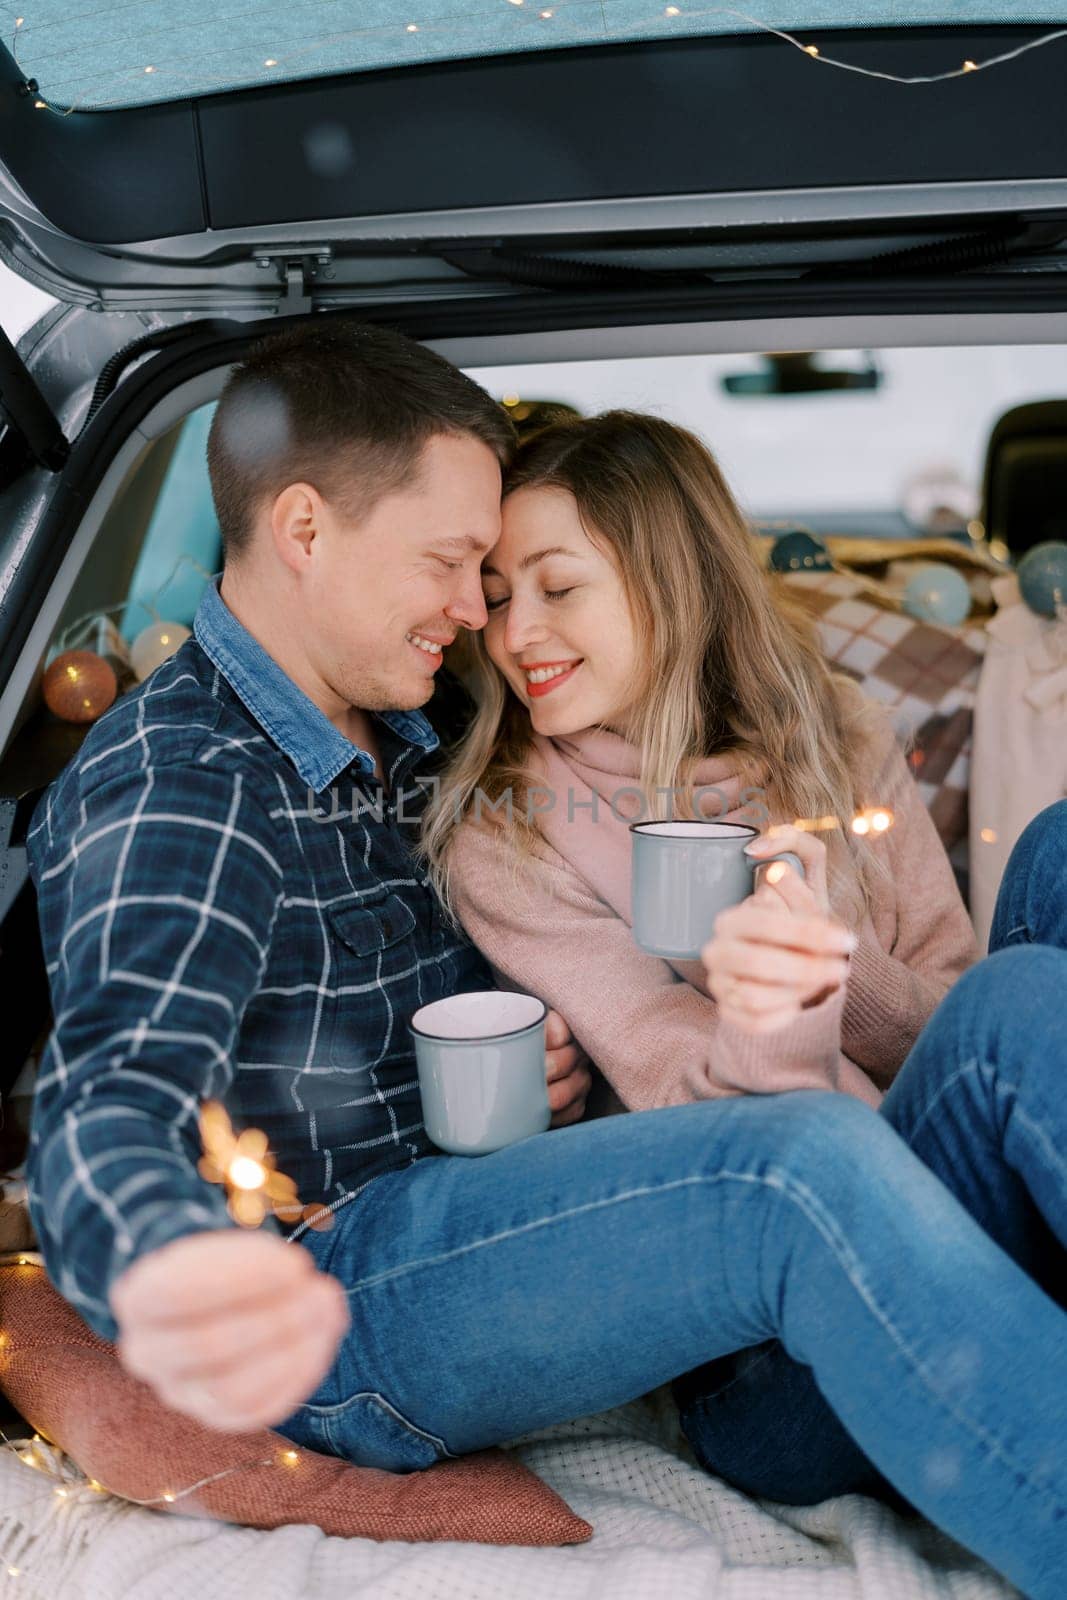 Smiling couple touching foreheads with mugs and sparklers while sitting in car trunk by Nadtochiy